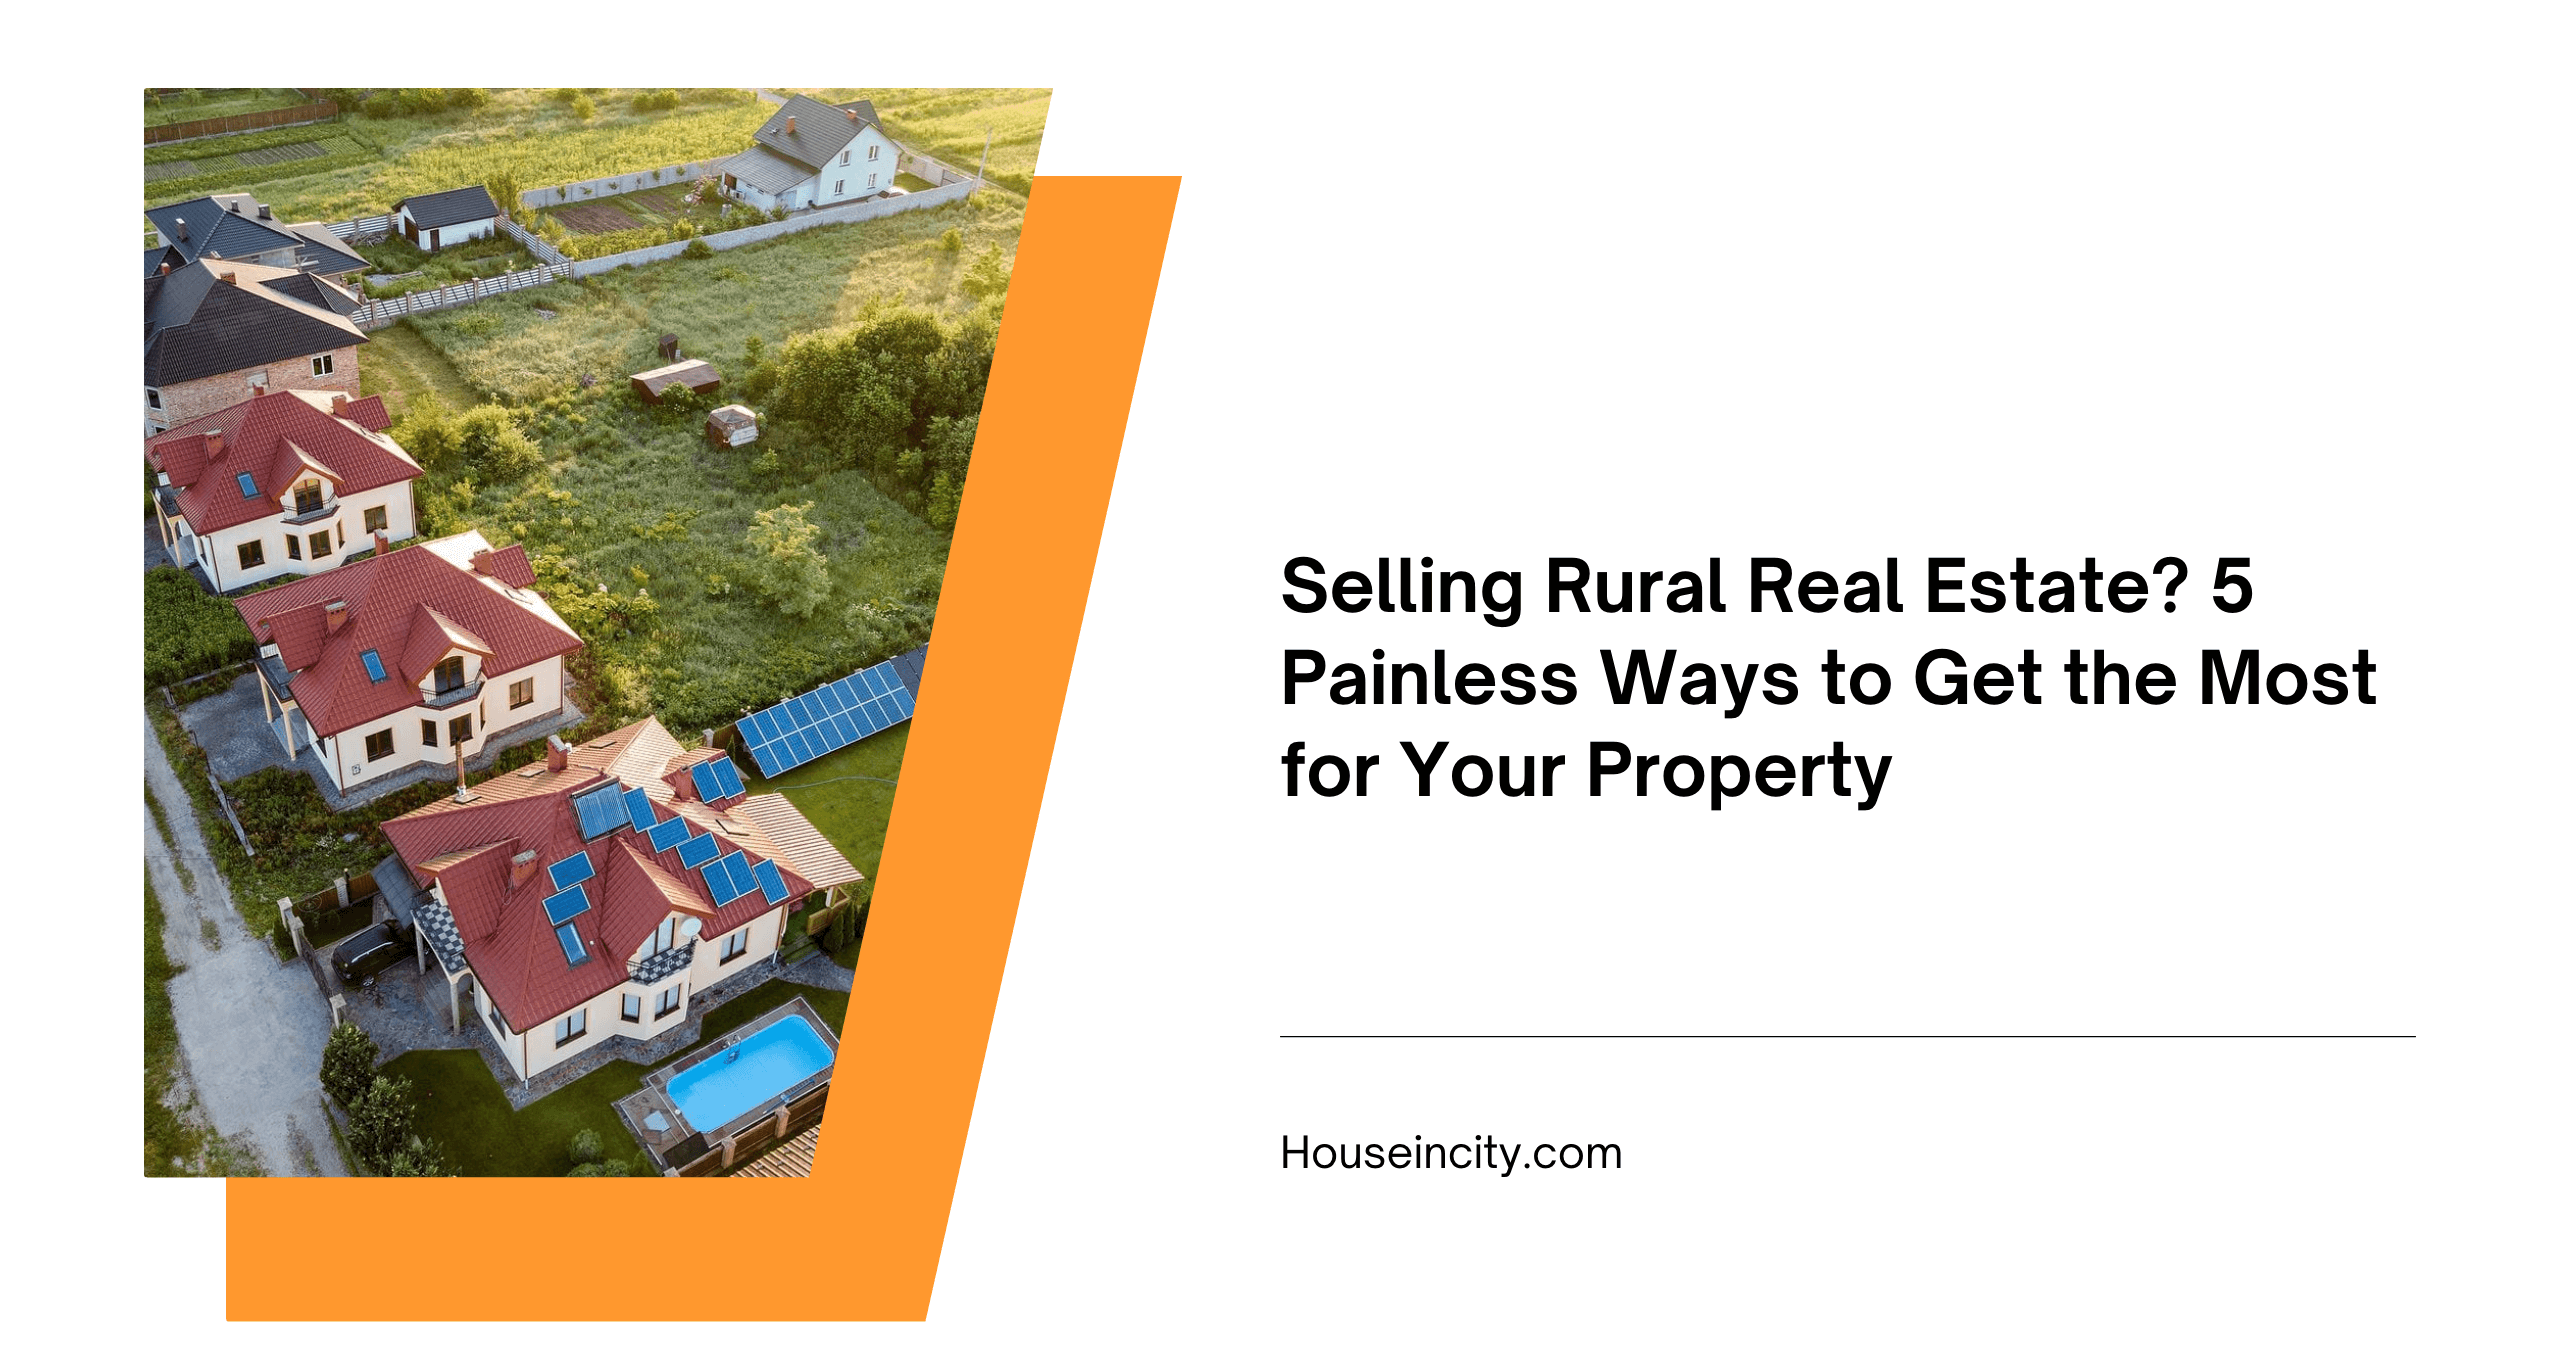 Selling Rural Real Estate? 5 Painless Ways to Get the Most for Your Property